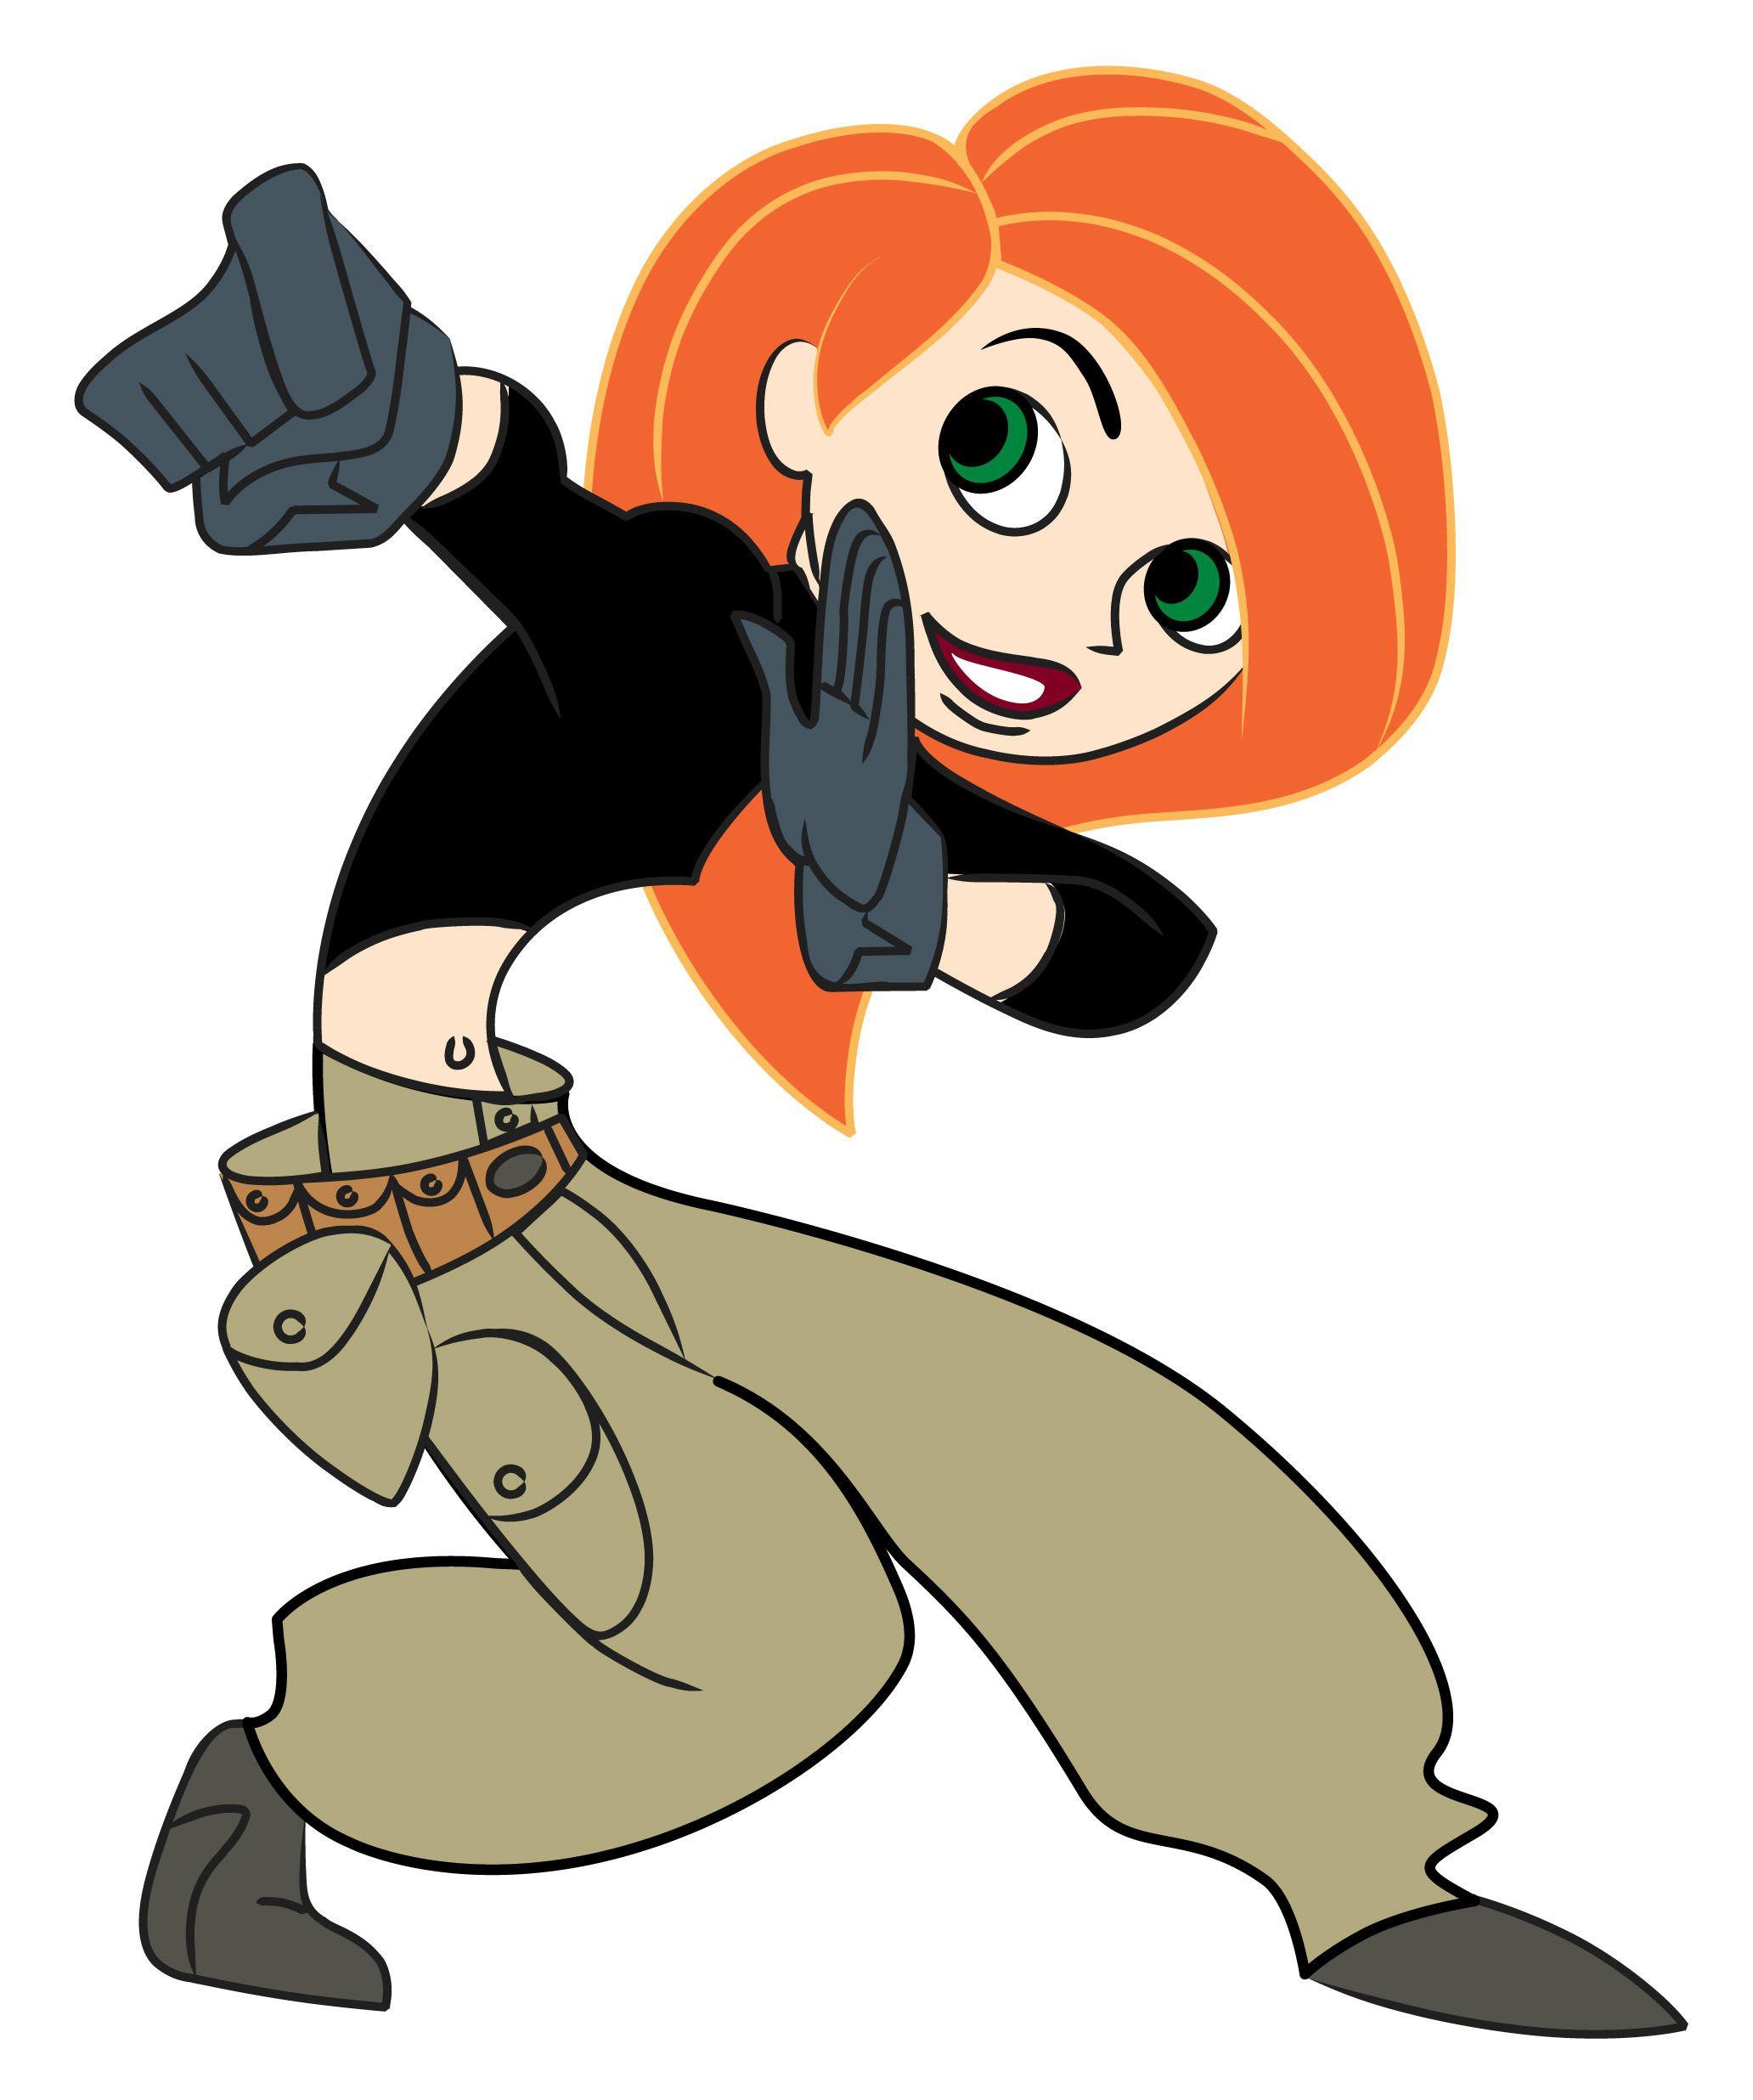 Kim Possible screenshots, image and pictures.